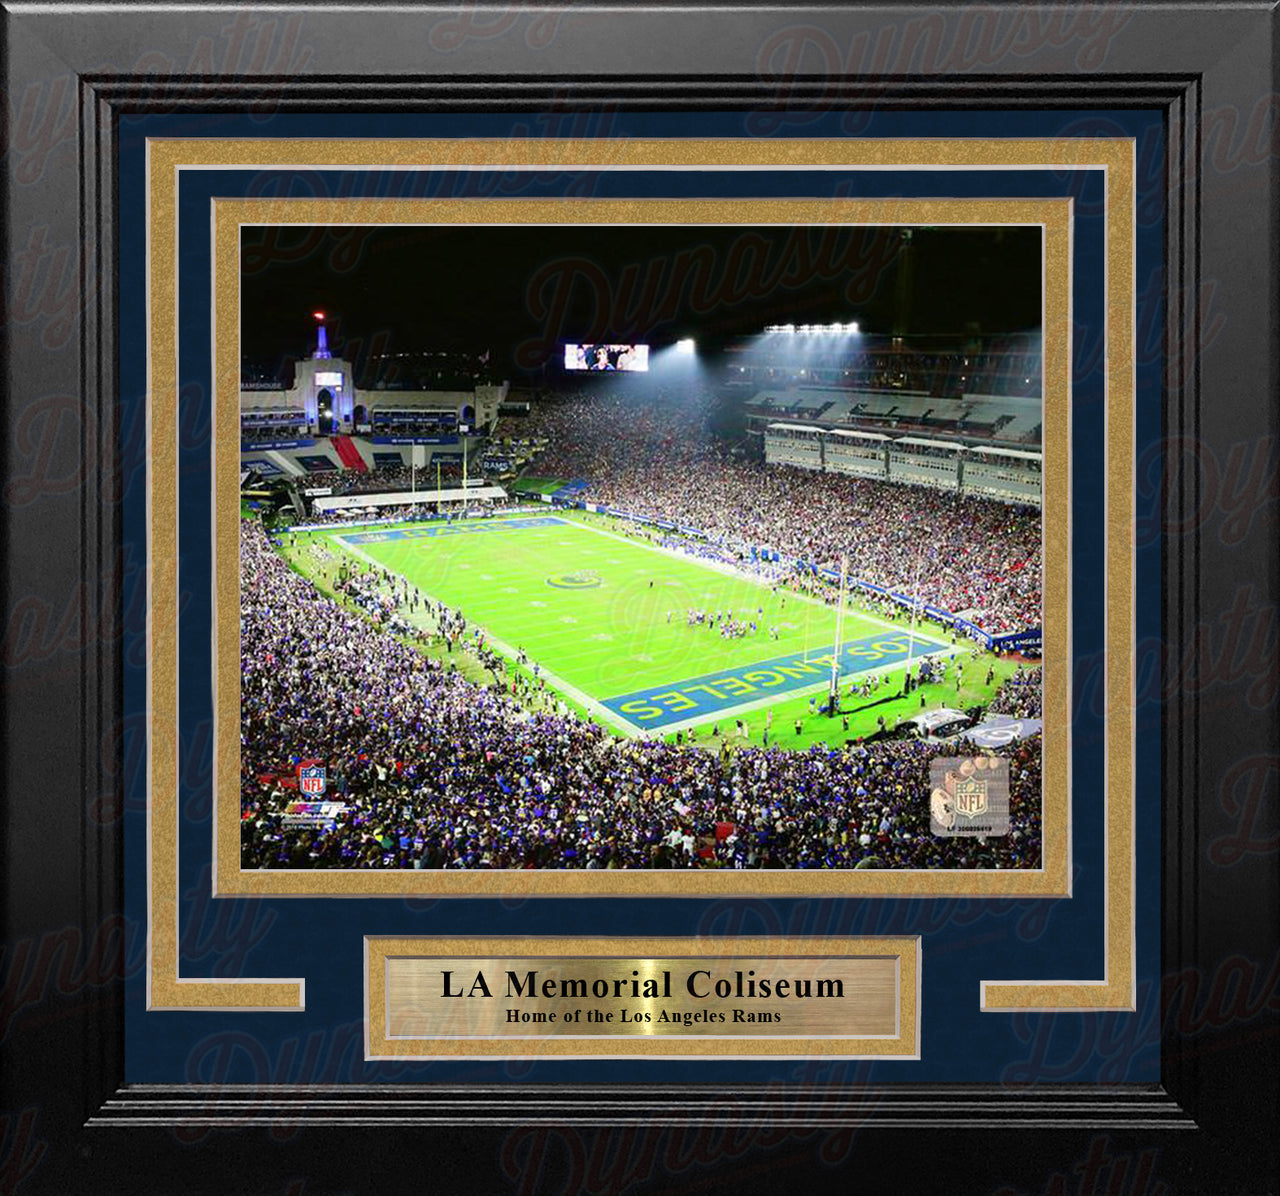 Los Angeles Rams LA Memorial Coliseum NFL Football 8" x 10" Framed and Matted Stadium Photo - Dynasty Sports & Framing 